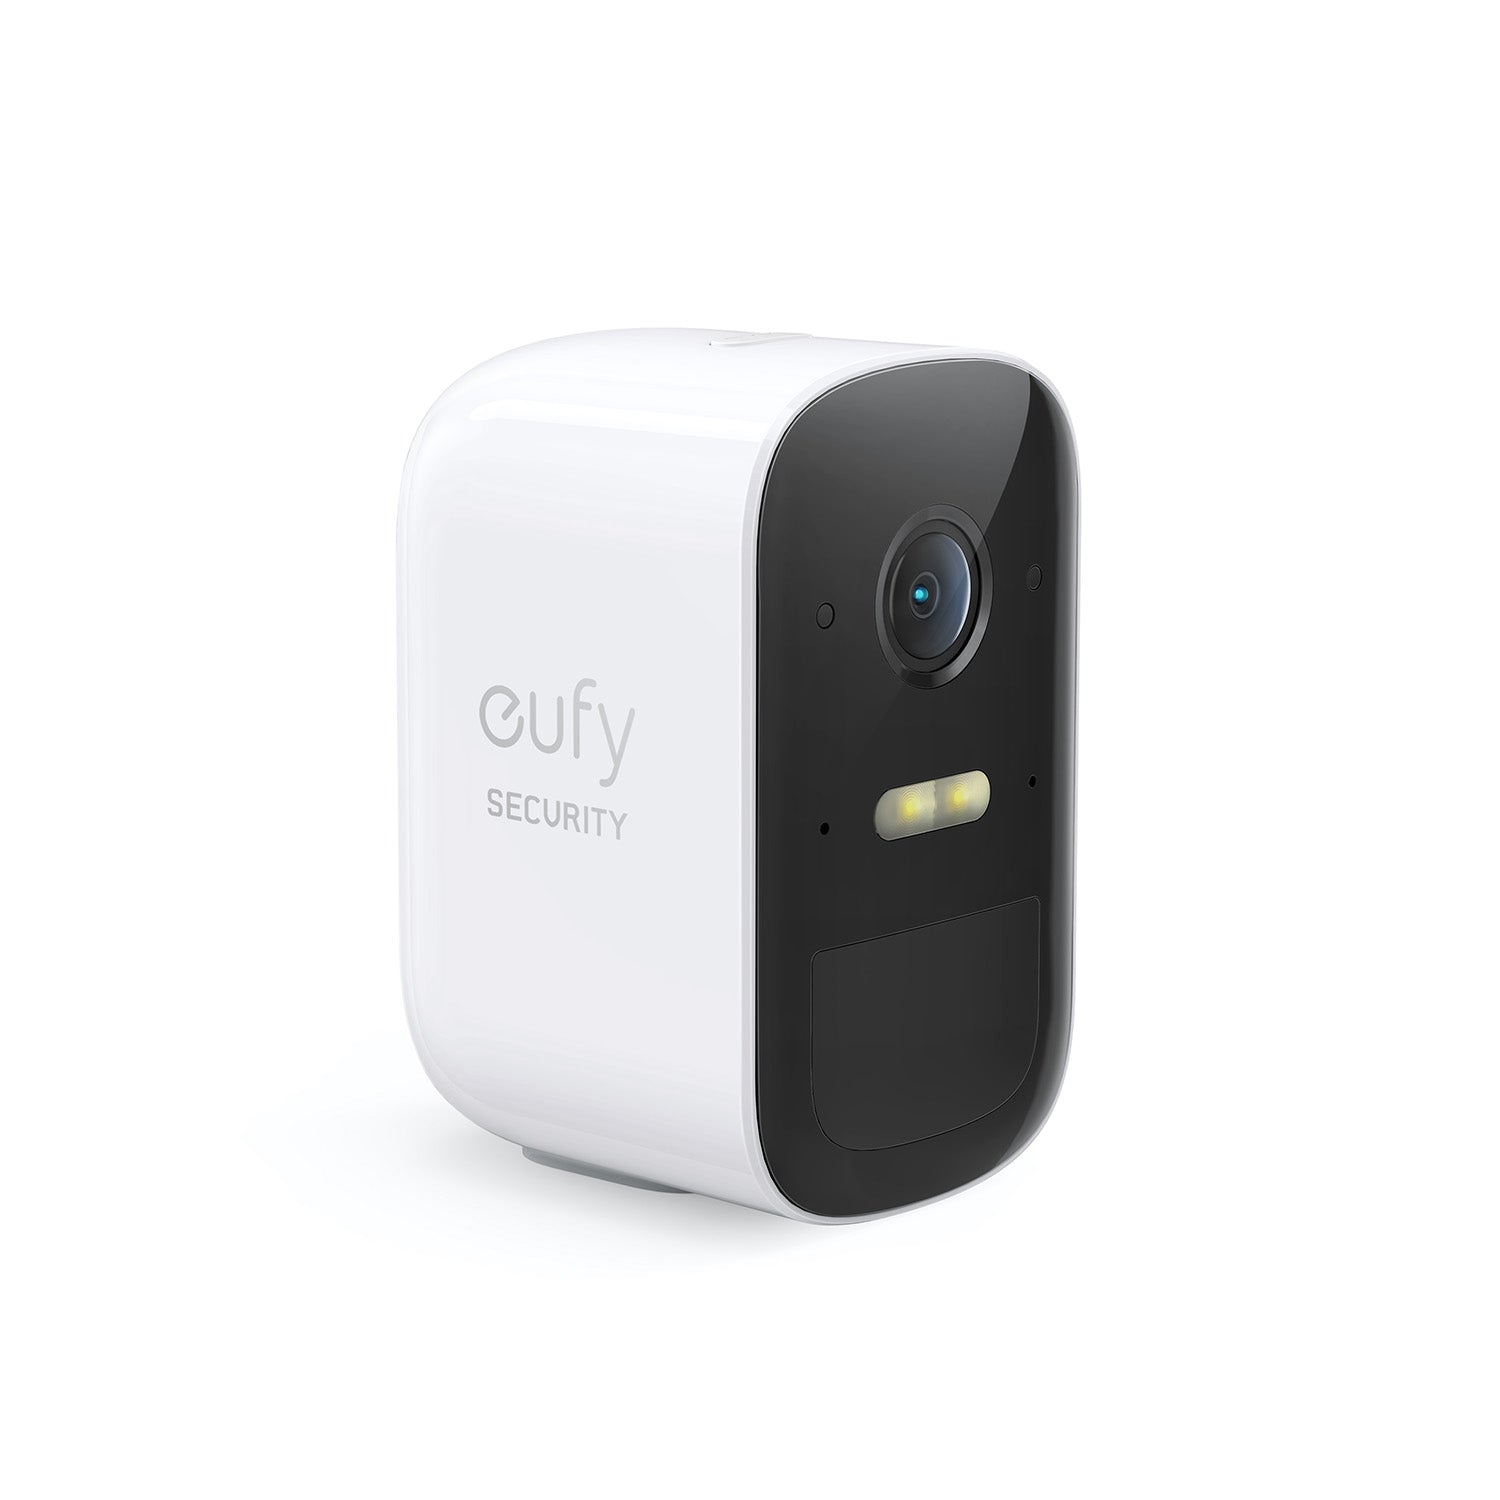 Wireless Outdoor Security Cameras at eufy